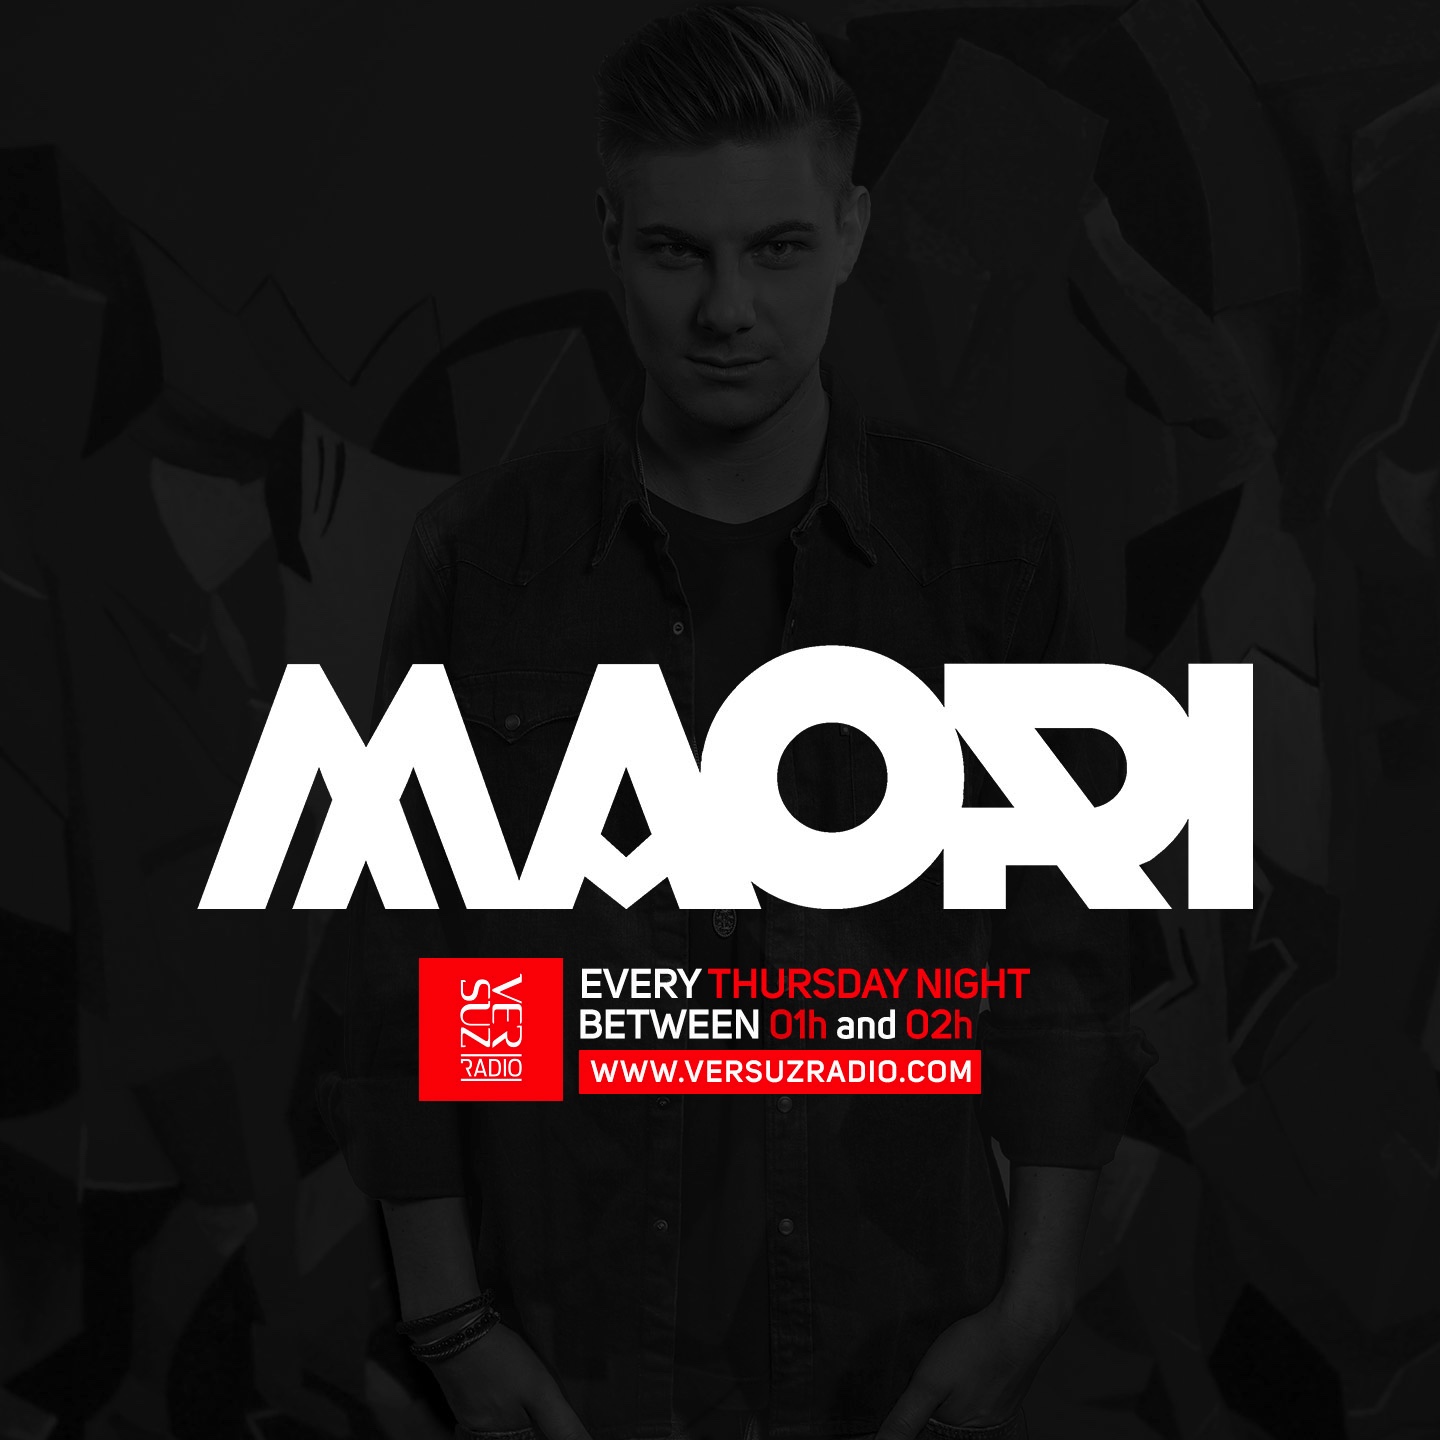 Clubhouse Radio by Maori - Episode #024